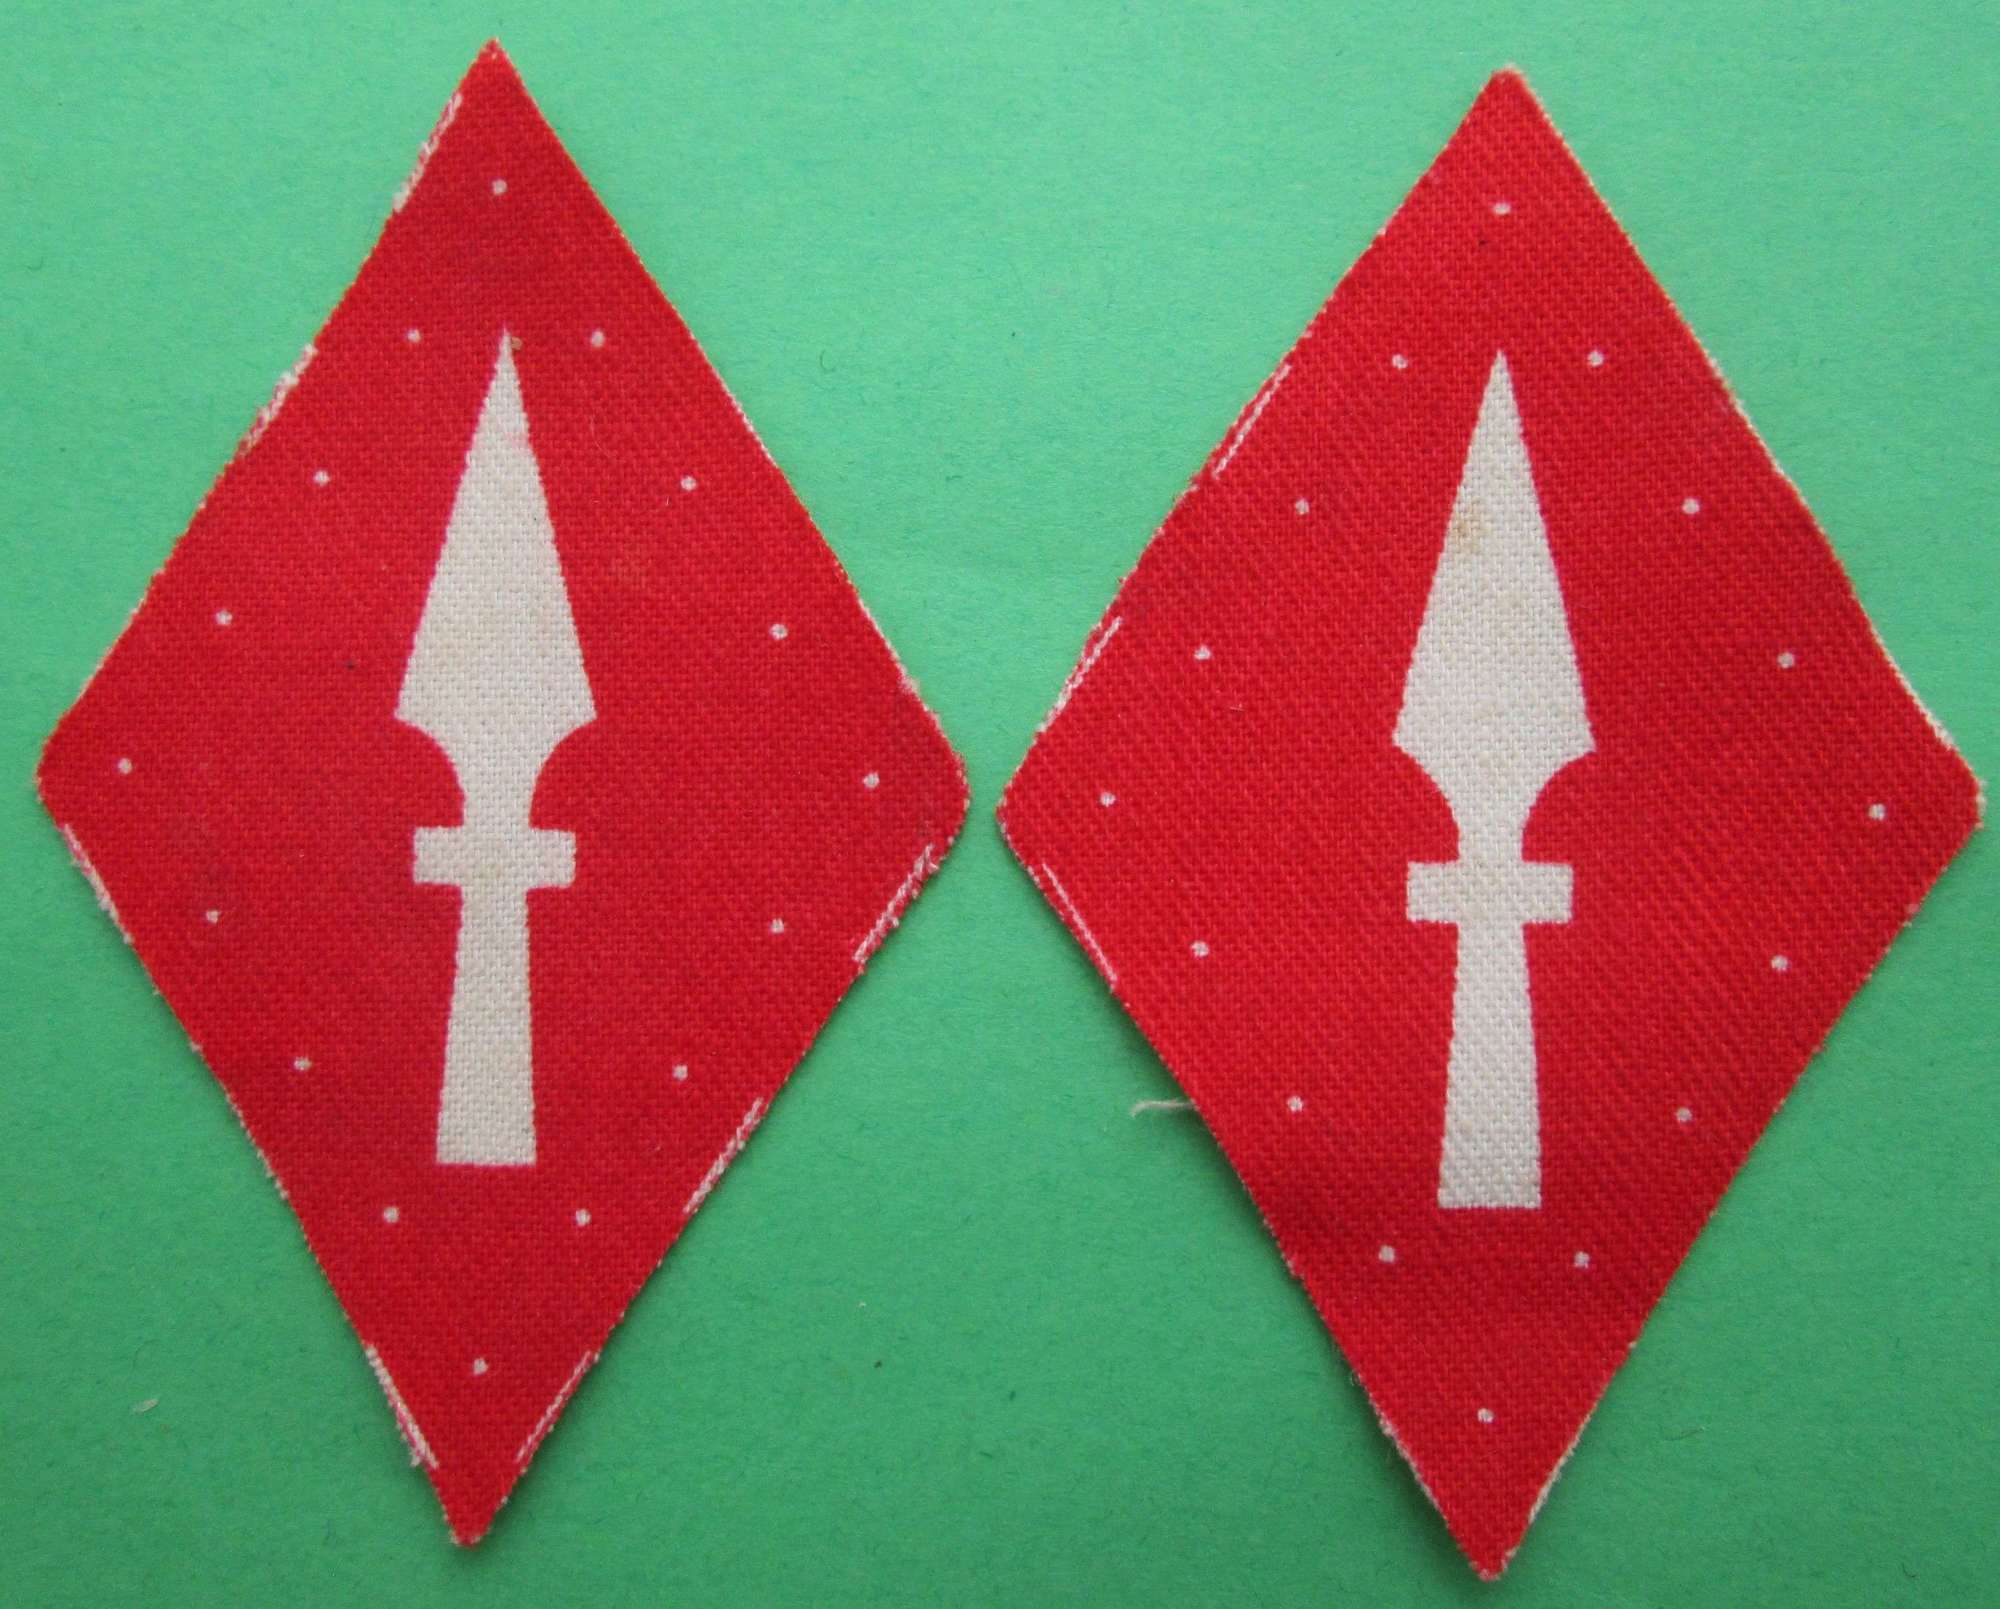 A PAIR OF 1ST CORPS FORMATION SIGNS